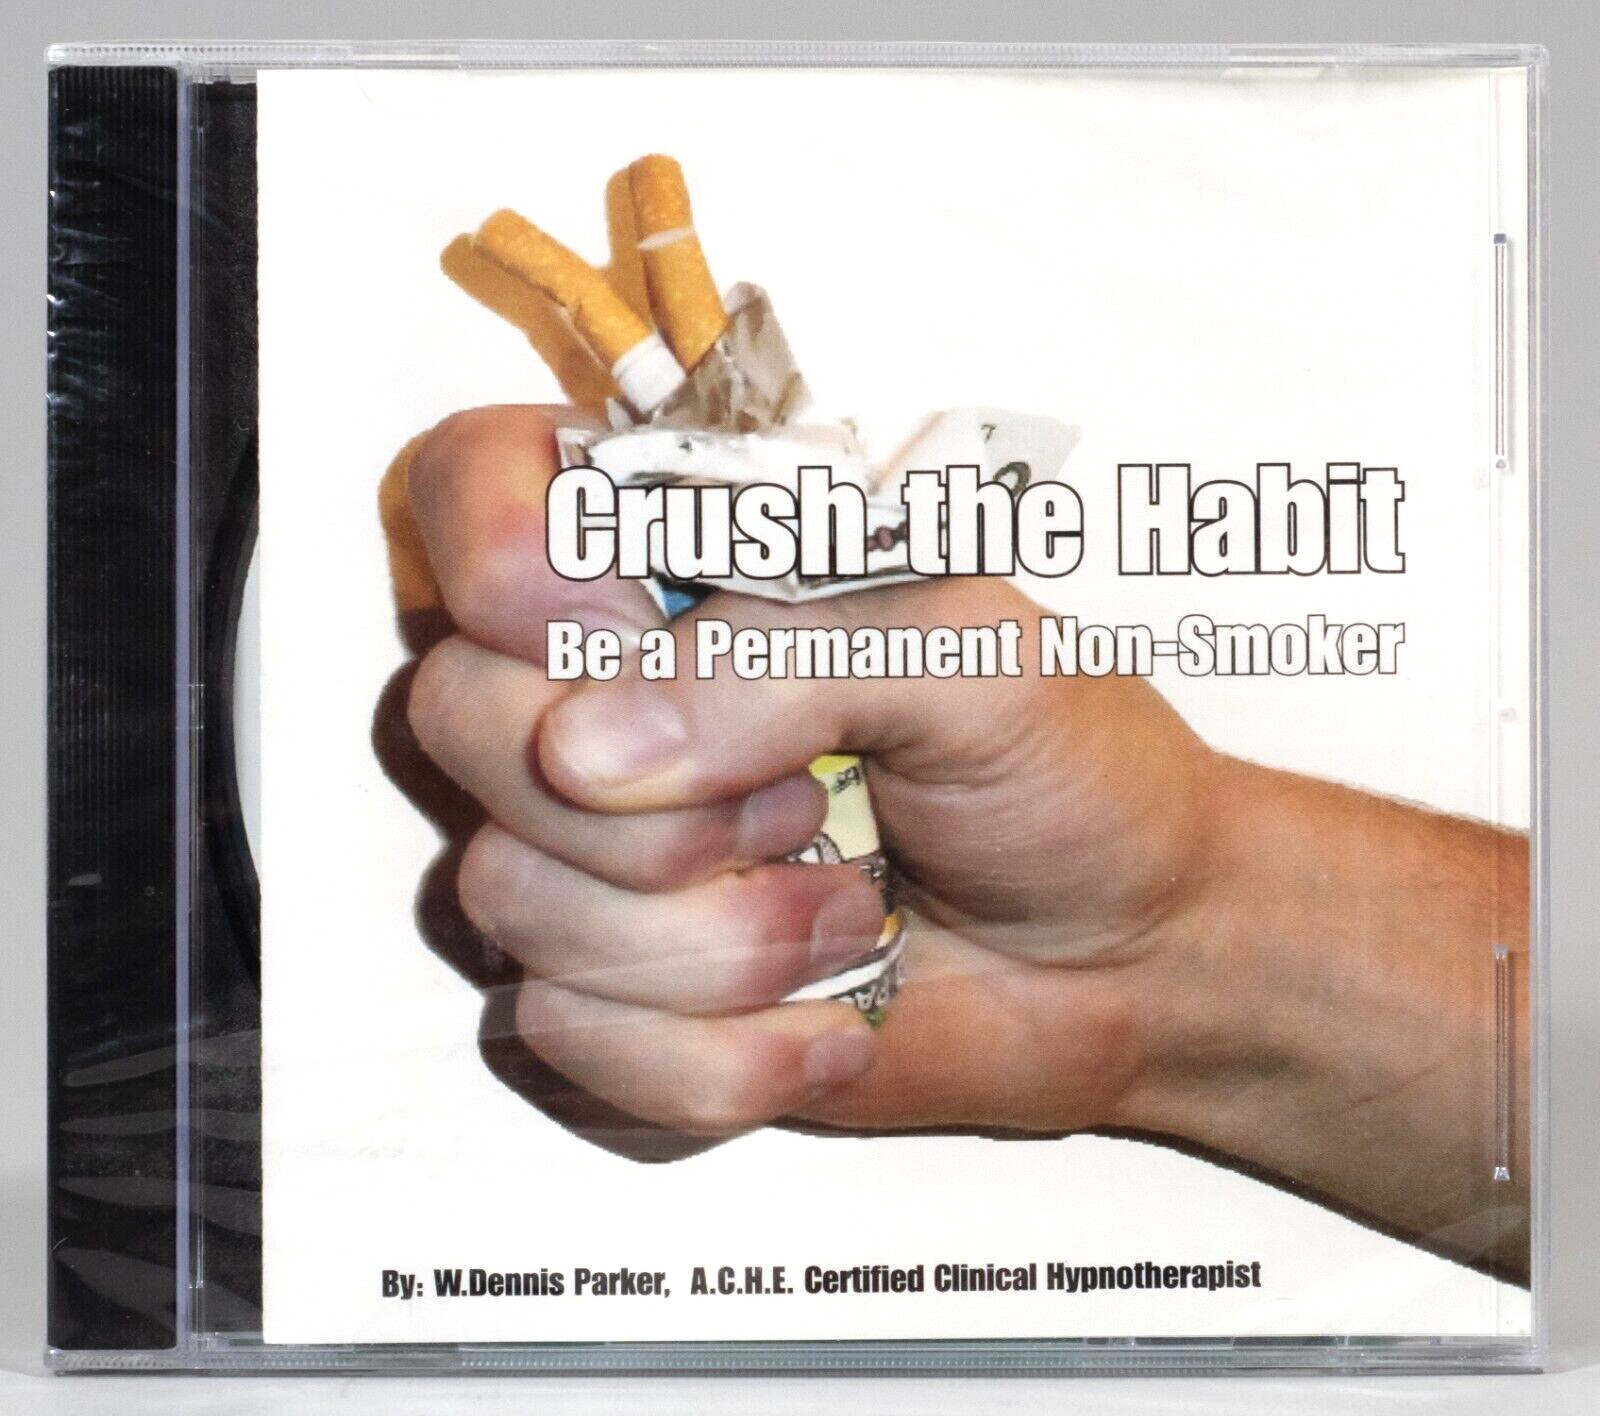 Crush The Habit - Be A Permanent Non-smoker Hypnotherapy Cd By W. Dennis Parker